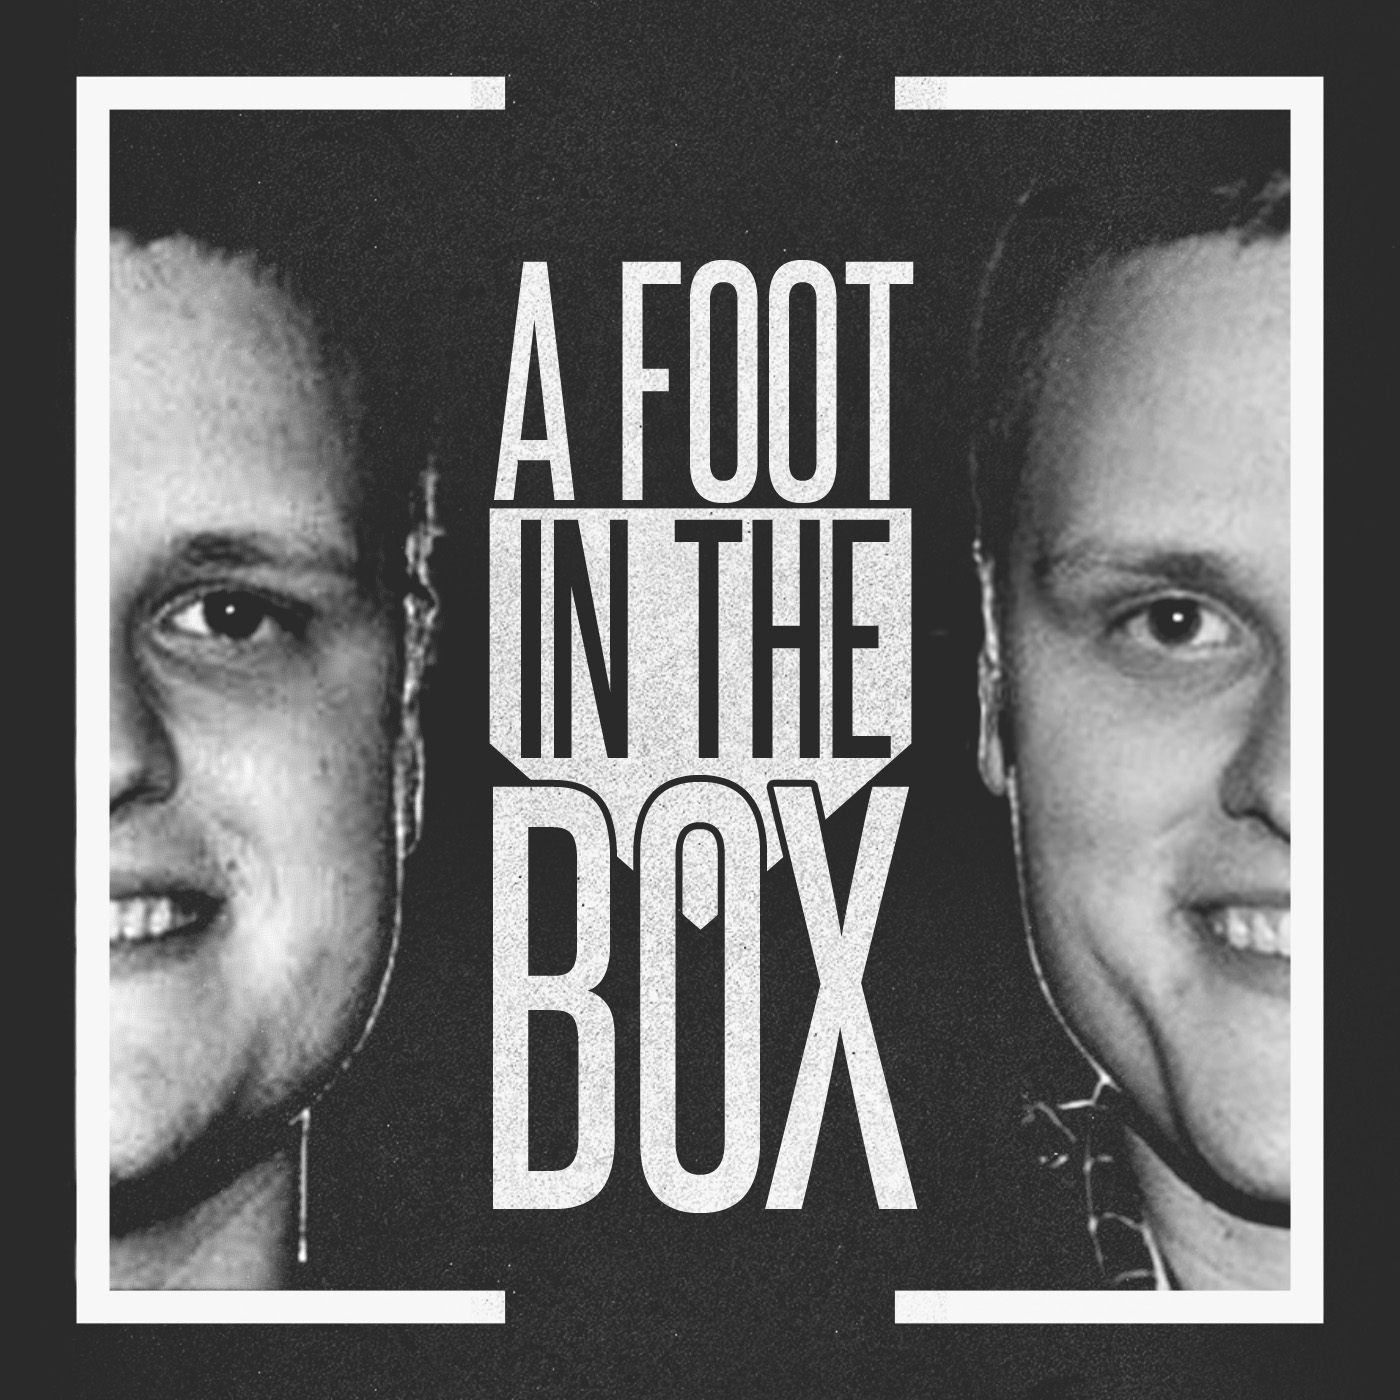 The Yips: Chuck Knoblauch — A Foot In The Box